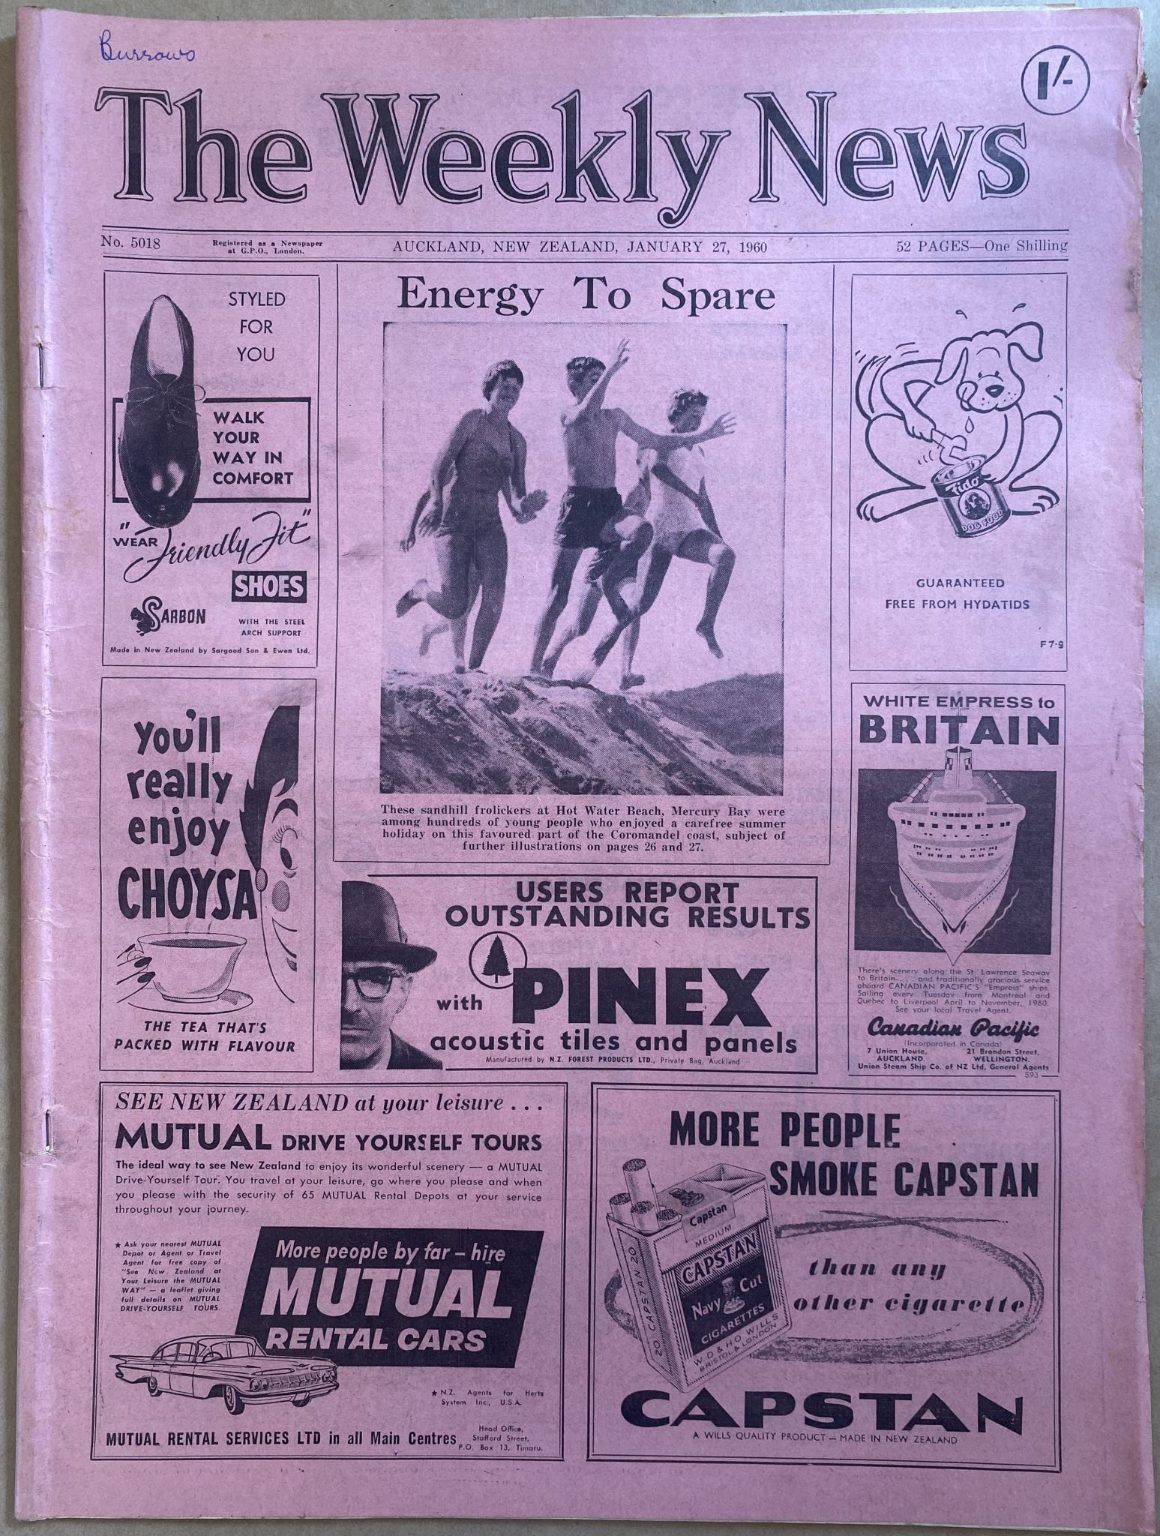 OLD NEWSPAPER: The Weekly News, No. 5018, 27 January 1960